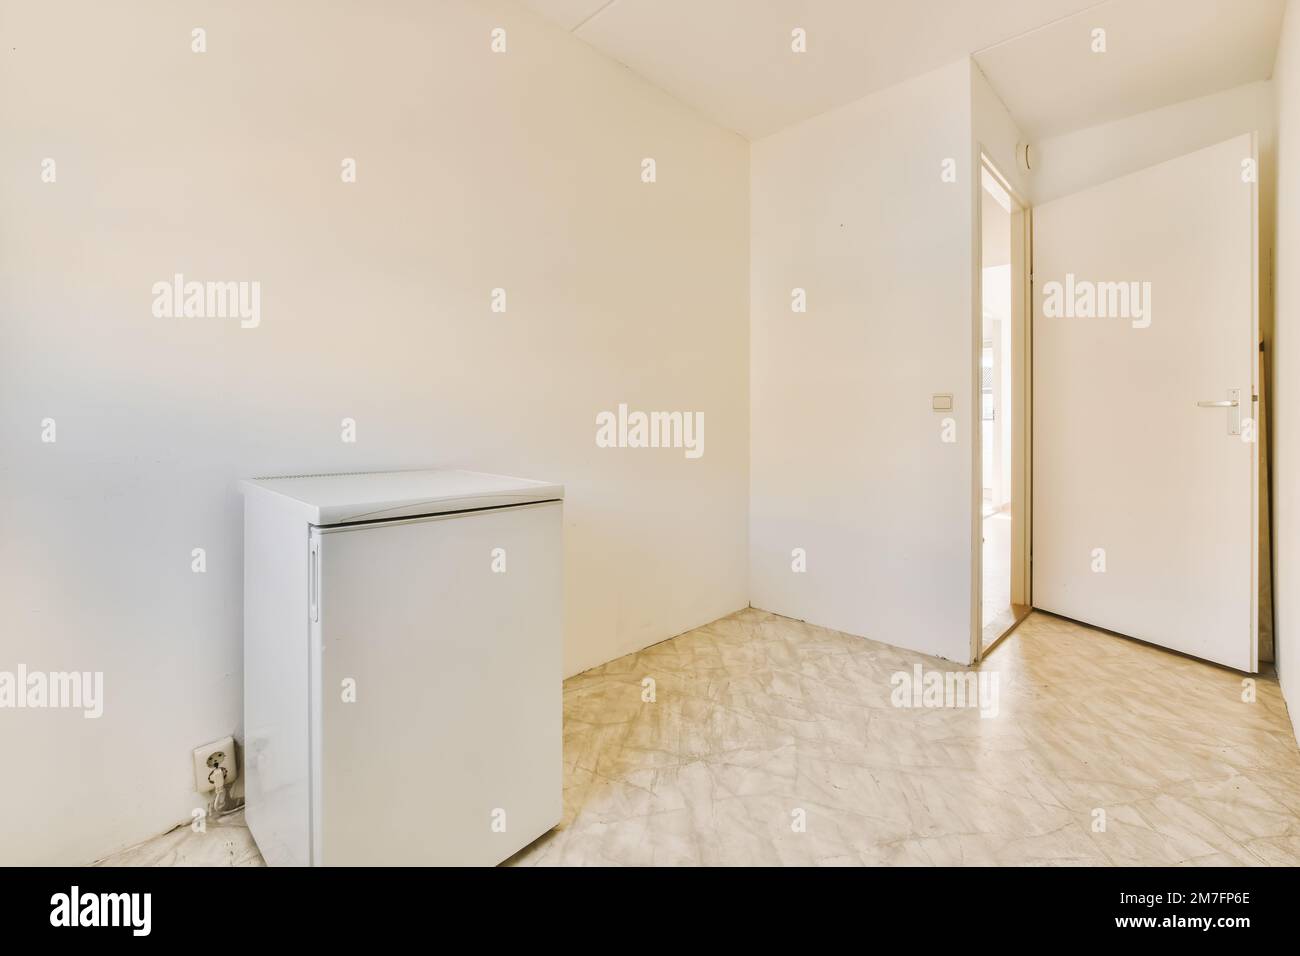 an empty room with a refrigerator freezer in the corner and no one door on the other wall behind it Stock Photo